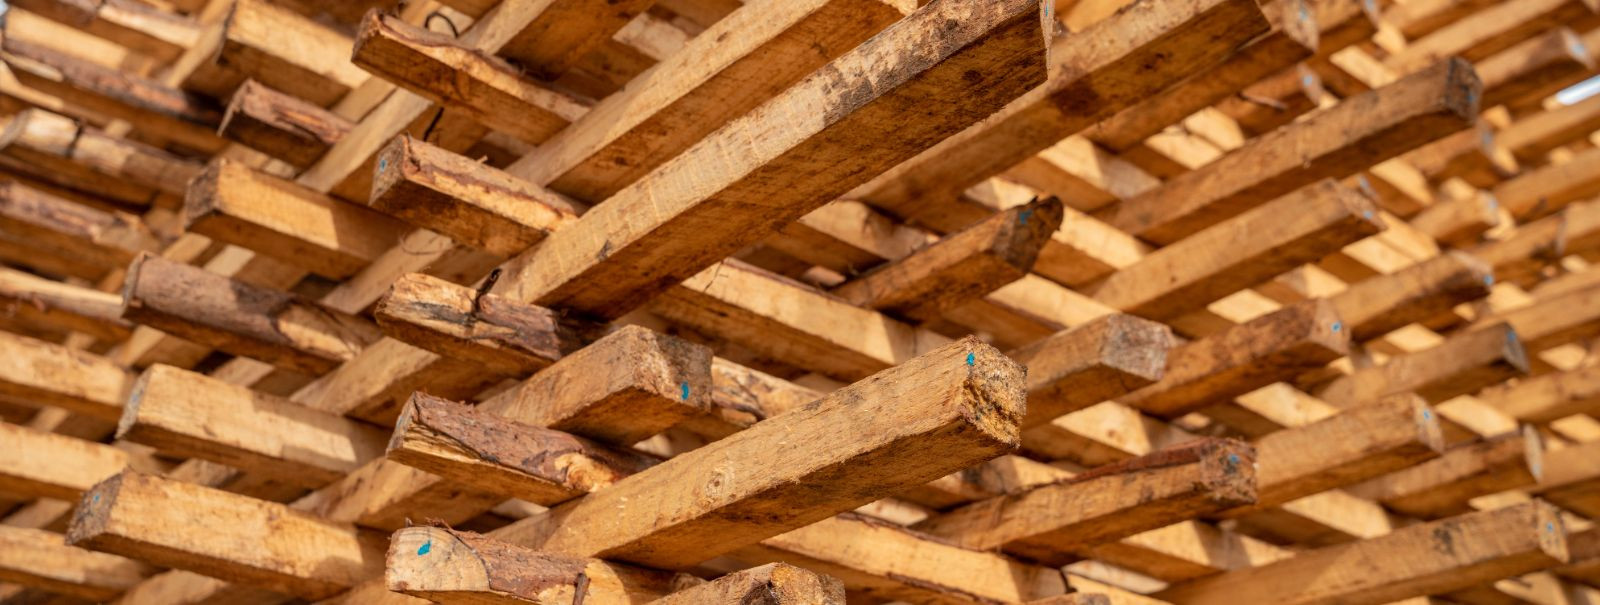 At the heart of the construction and logistics industries lies a material that is both timeless and essential - timber. Recognizing the pivotal role it plays, R